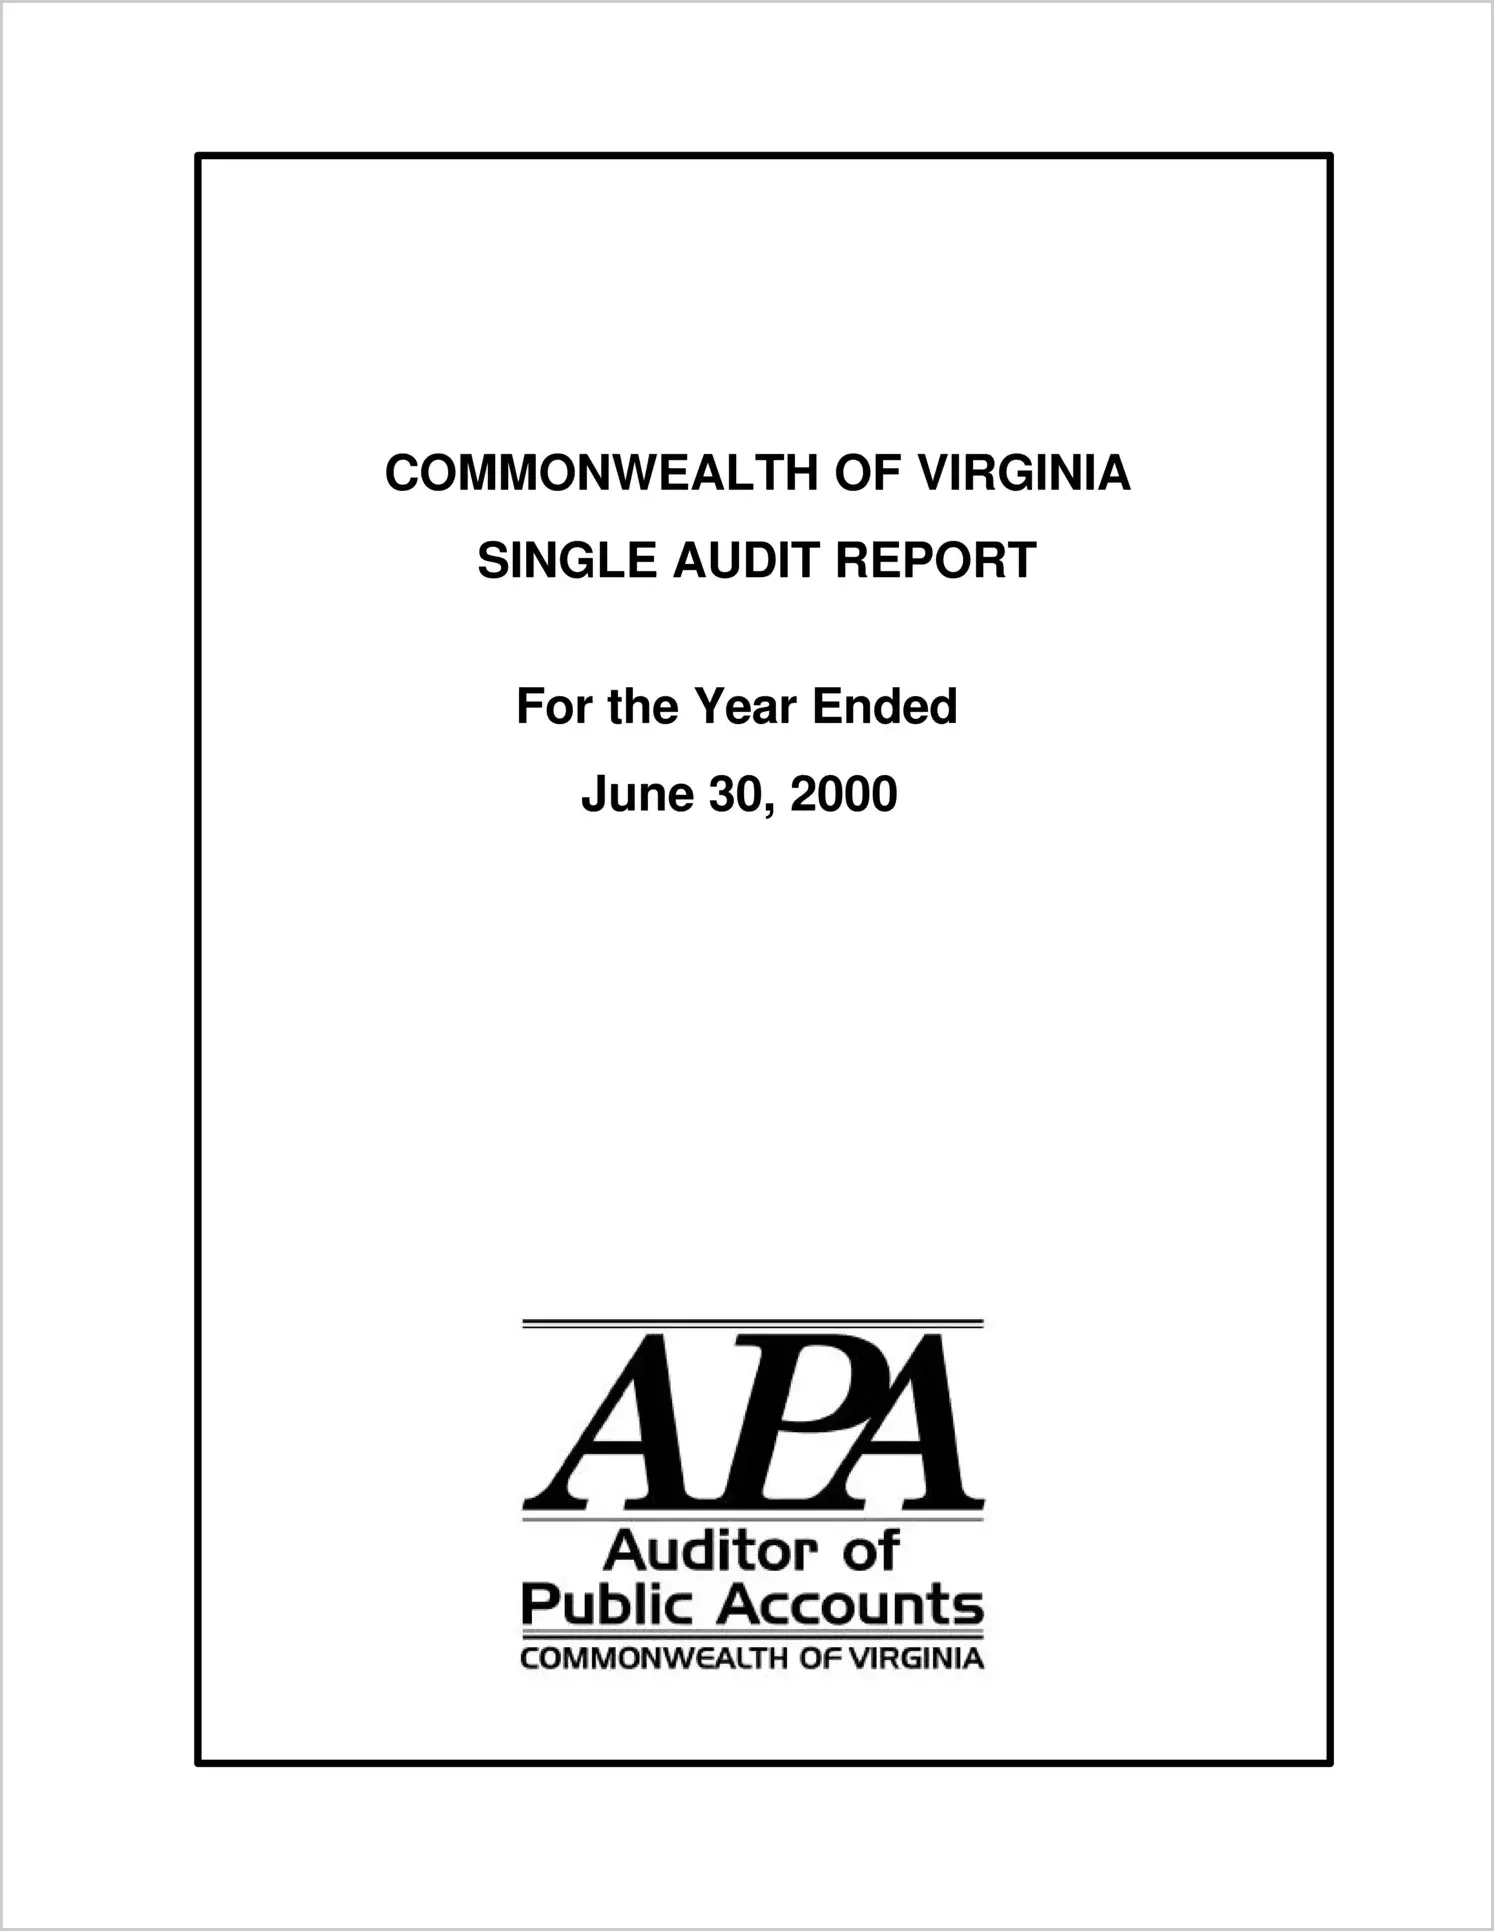 Commonwealth of Virginia Single Audit Report for the Year Ended June 30, 2000